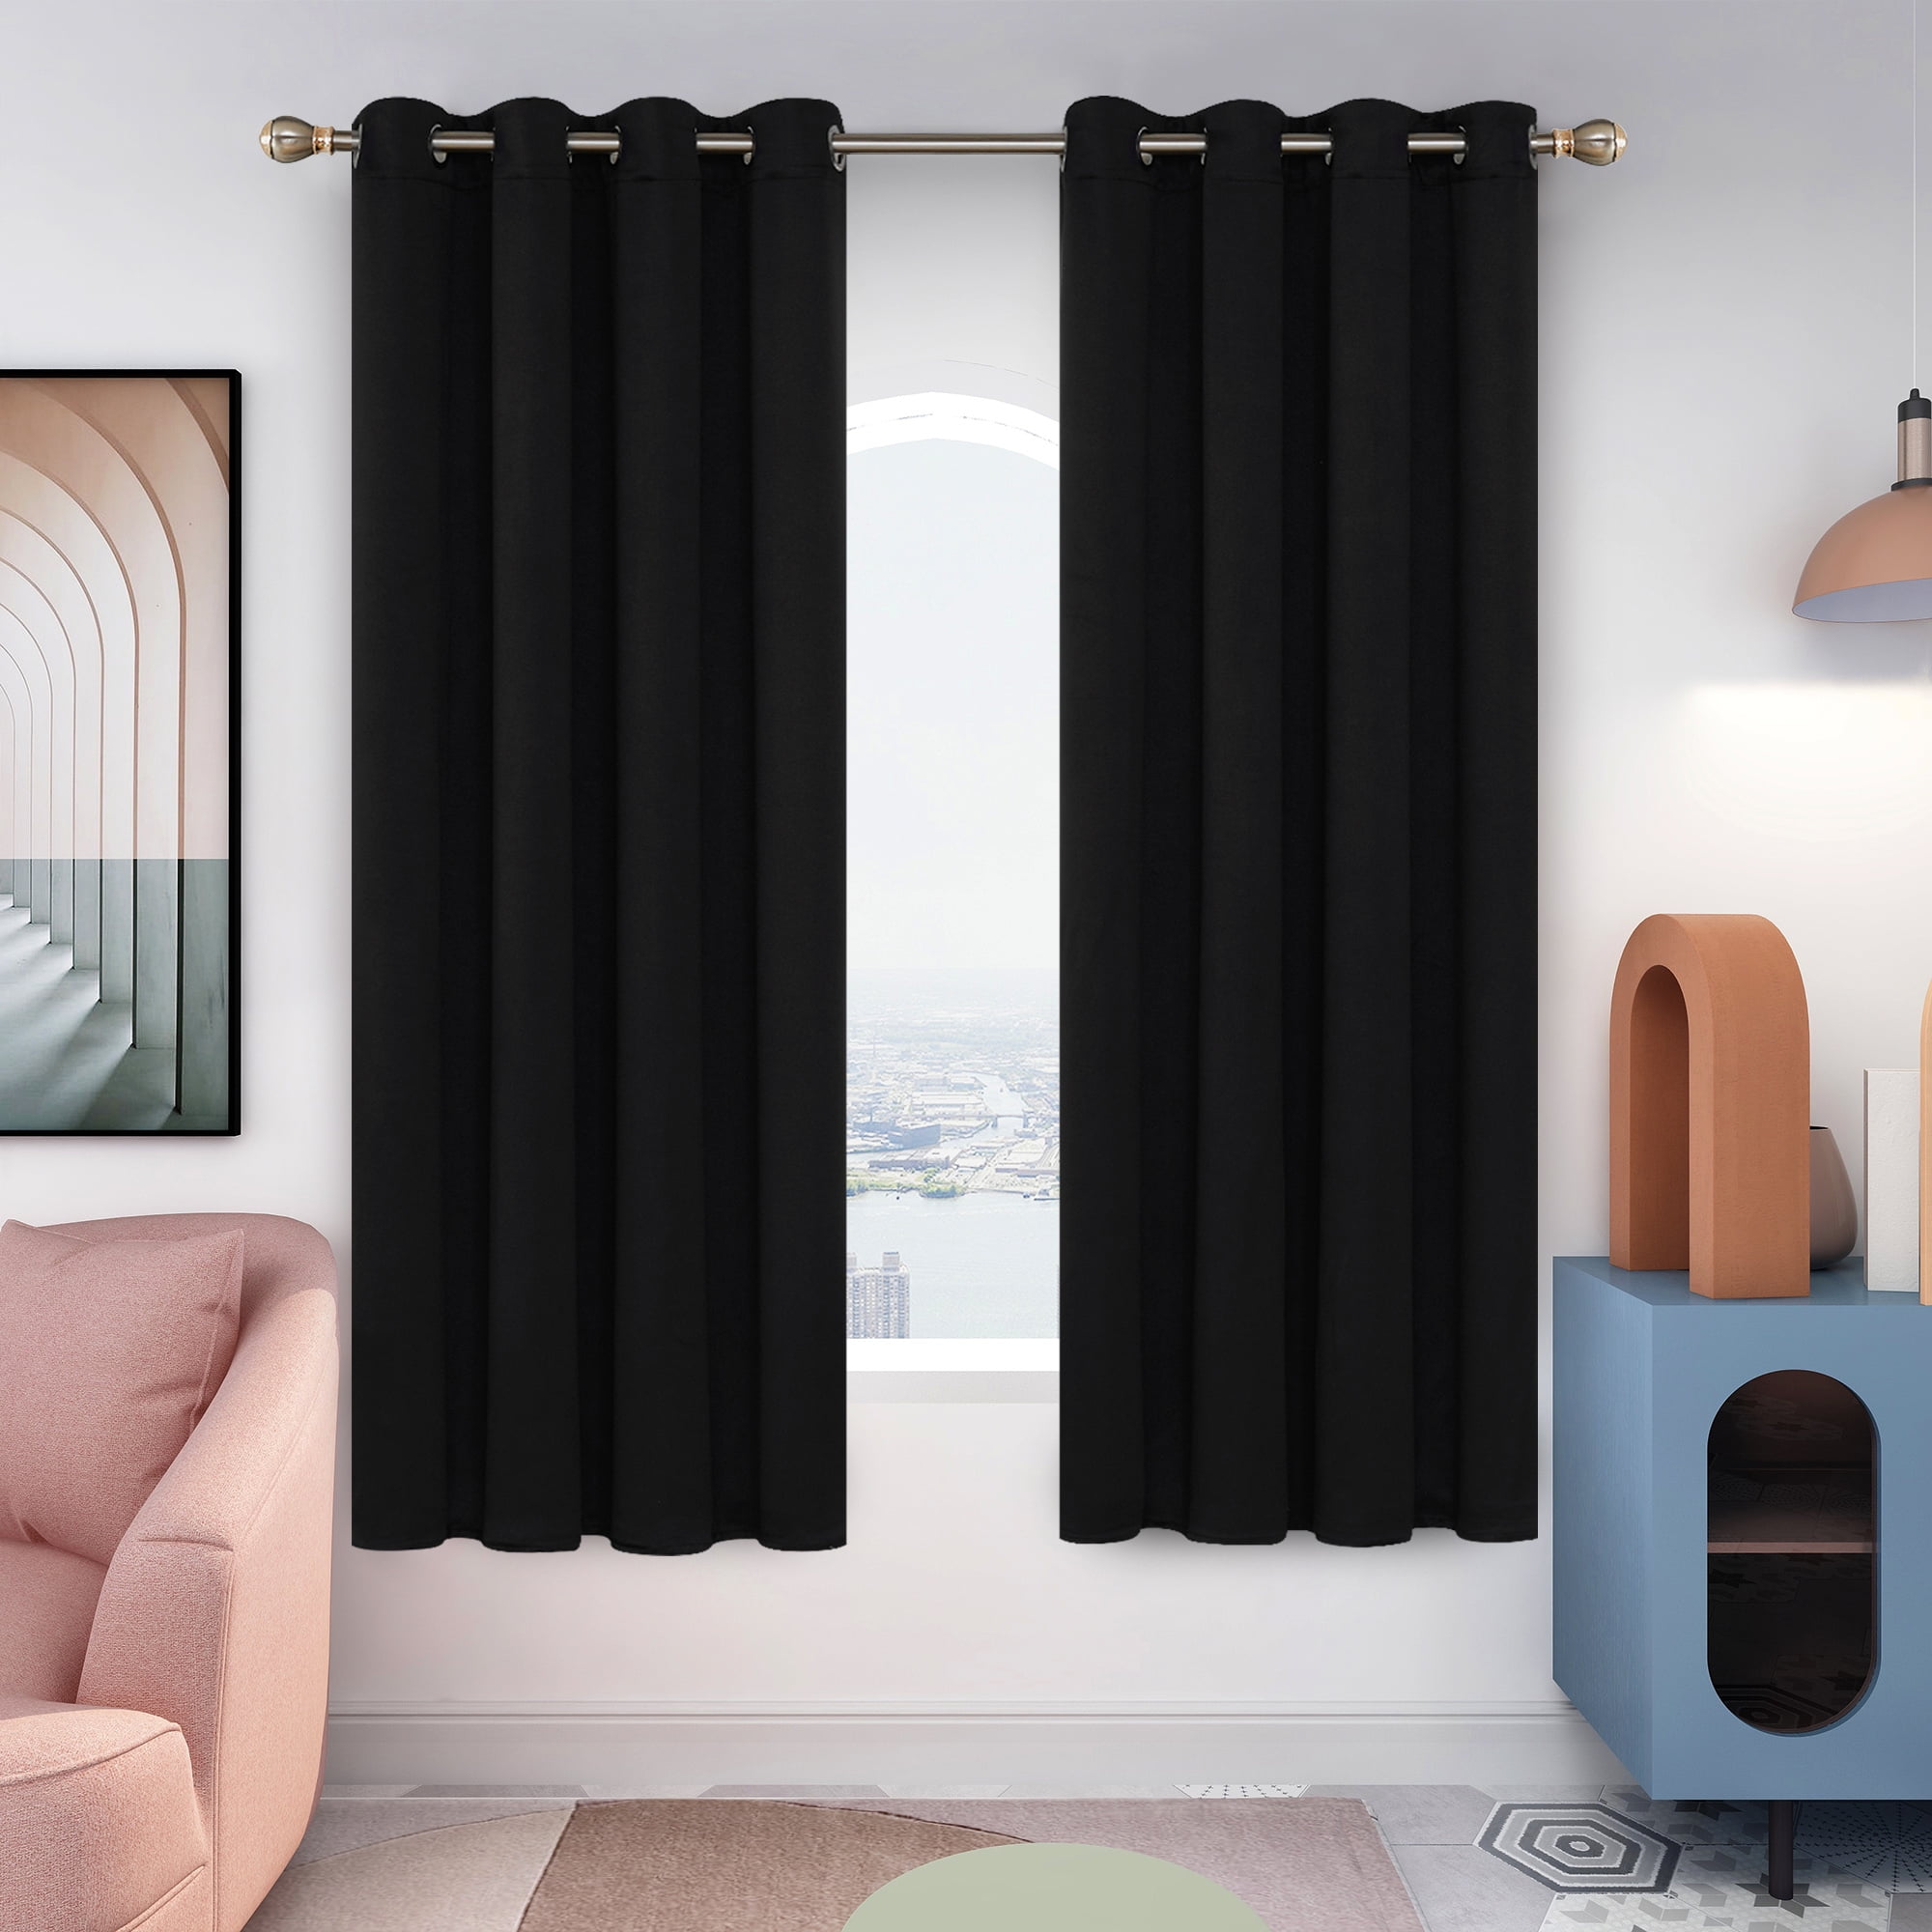 Deconovo Thermal Insulated Blackout Curtains 52x72 inch - Grommet Room Darkening Window Curtains for Bedroom (52x72 inch, Black, Set of 2 Panels)